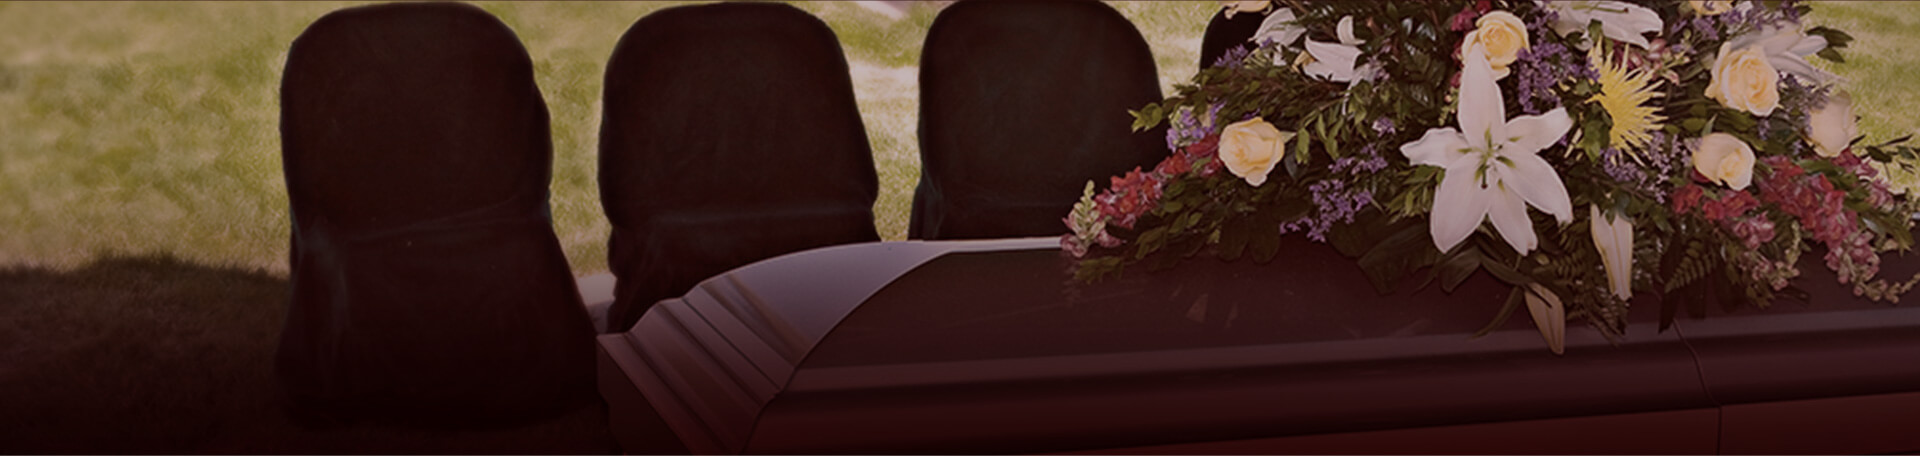 TrinityFuneral ServicesandPrices TraditionalCremation 